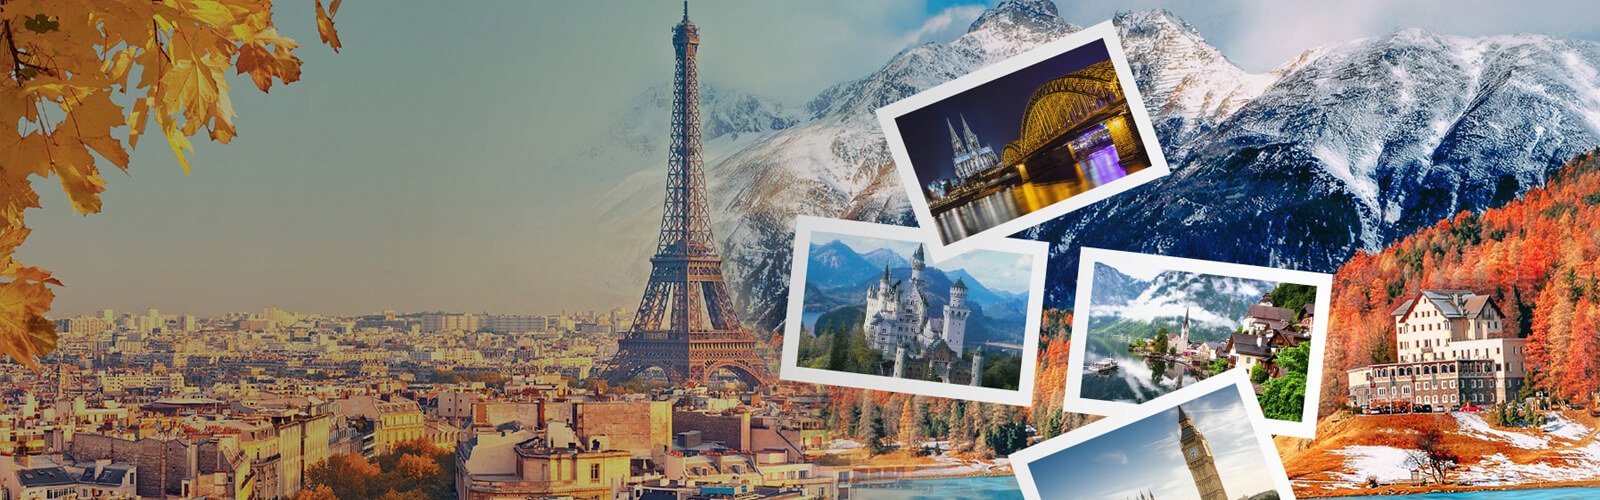 Day 1 - Arrive into Paris - the City of Romance, Lights and Glamour. Enjoy a romantic cruise on the River Seine